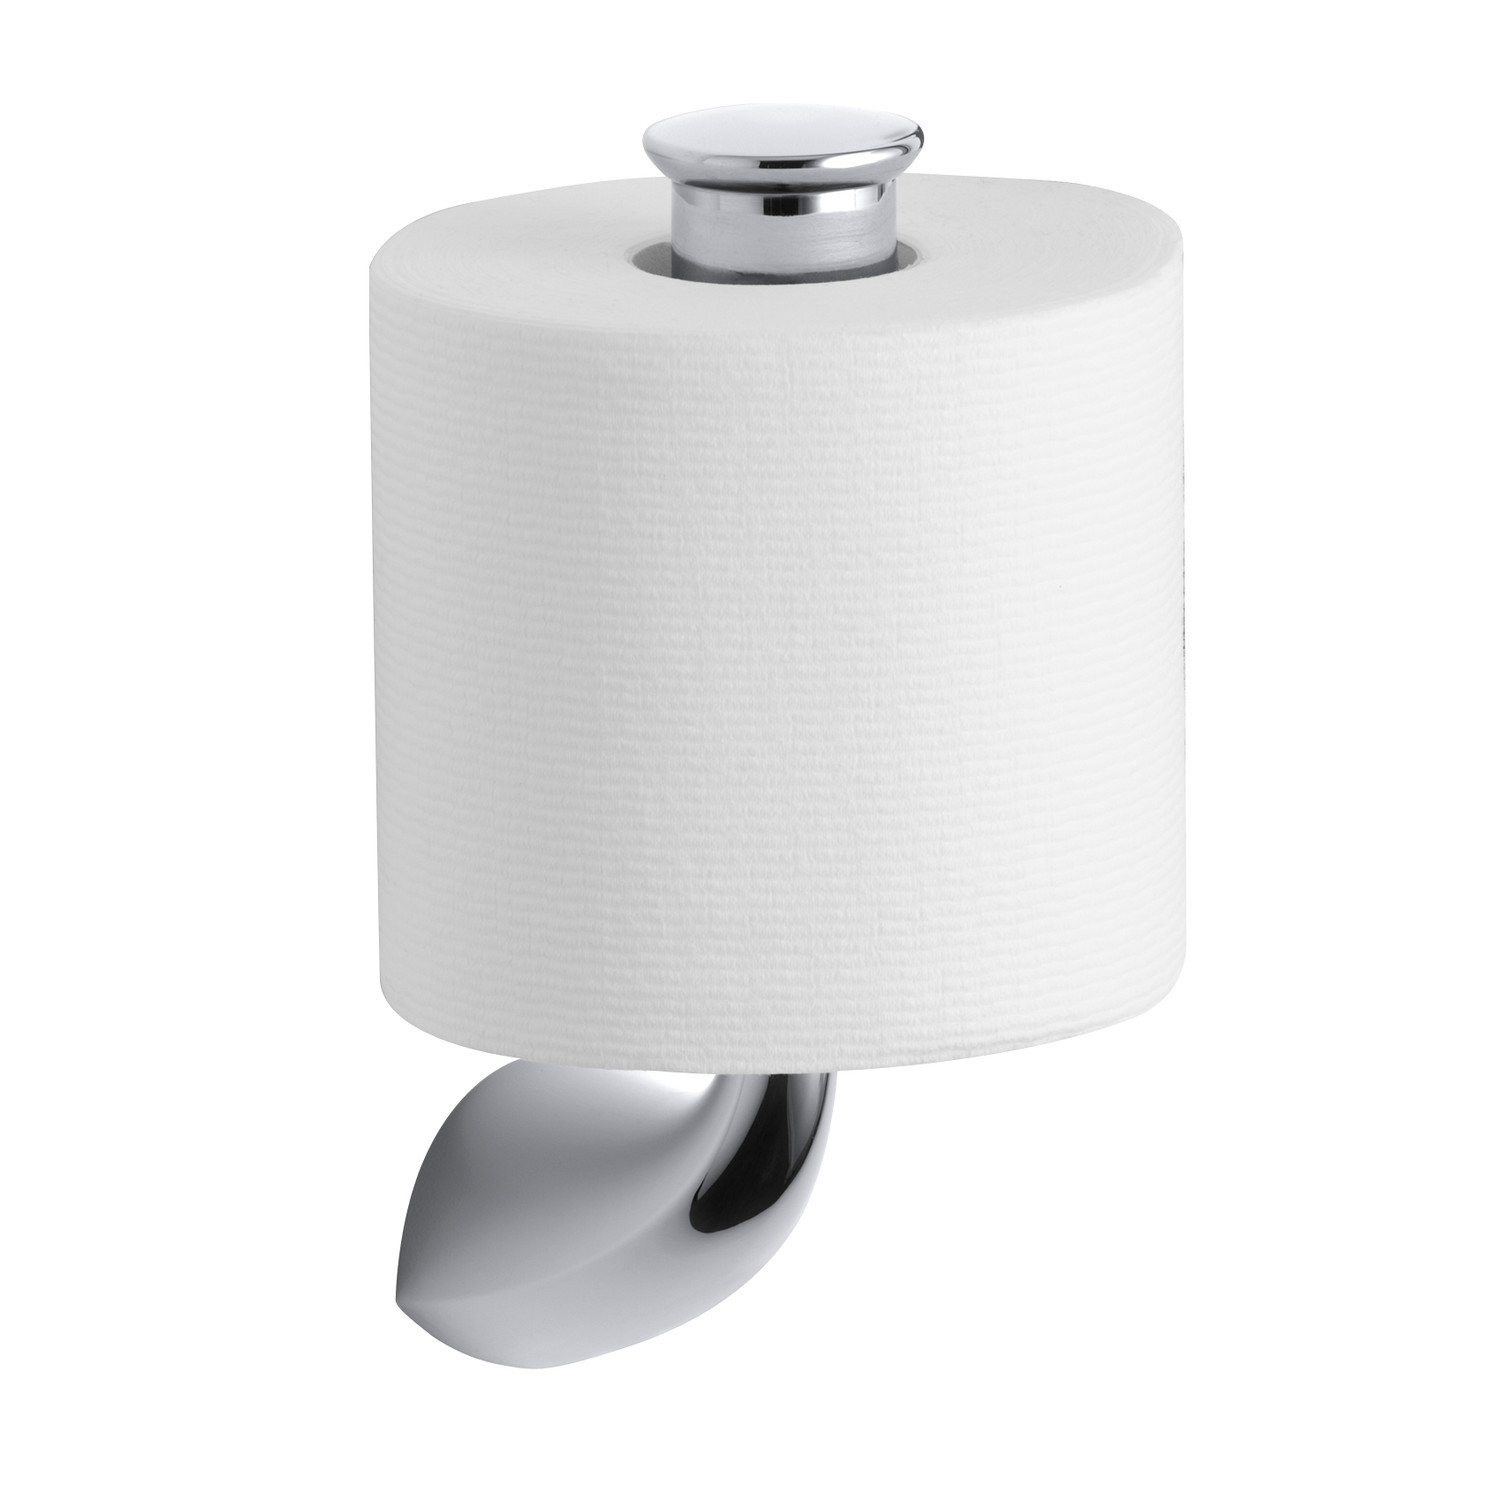 Small Bathroom Toilet Paper Holder
 The Vertical Toilet Paper Holders That Are Ideal for Your